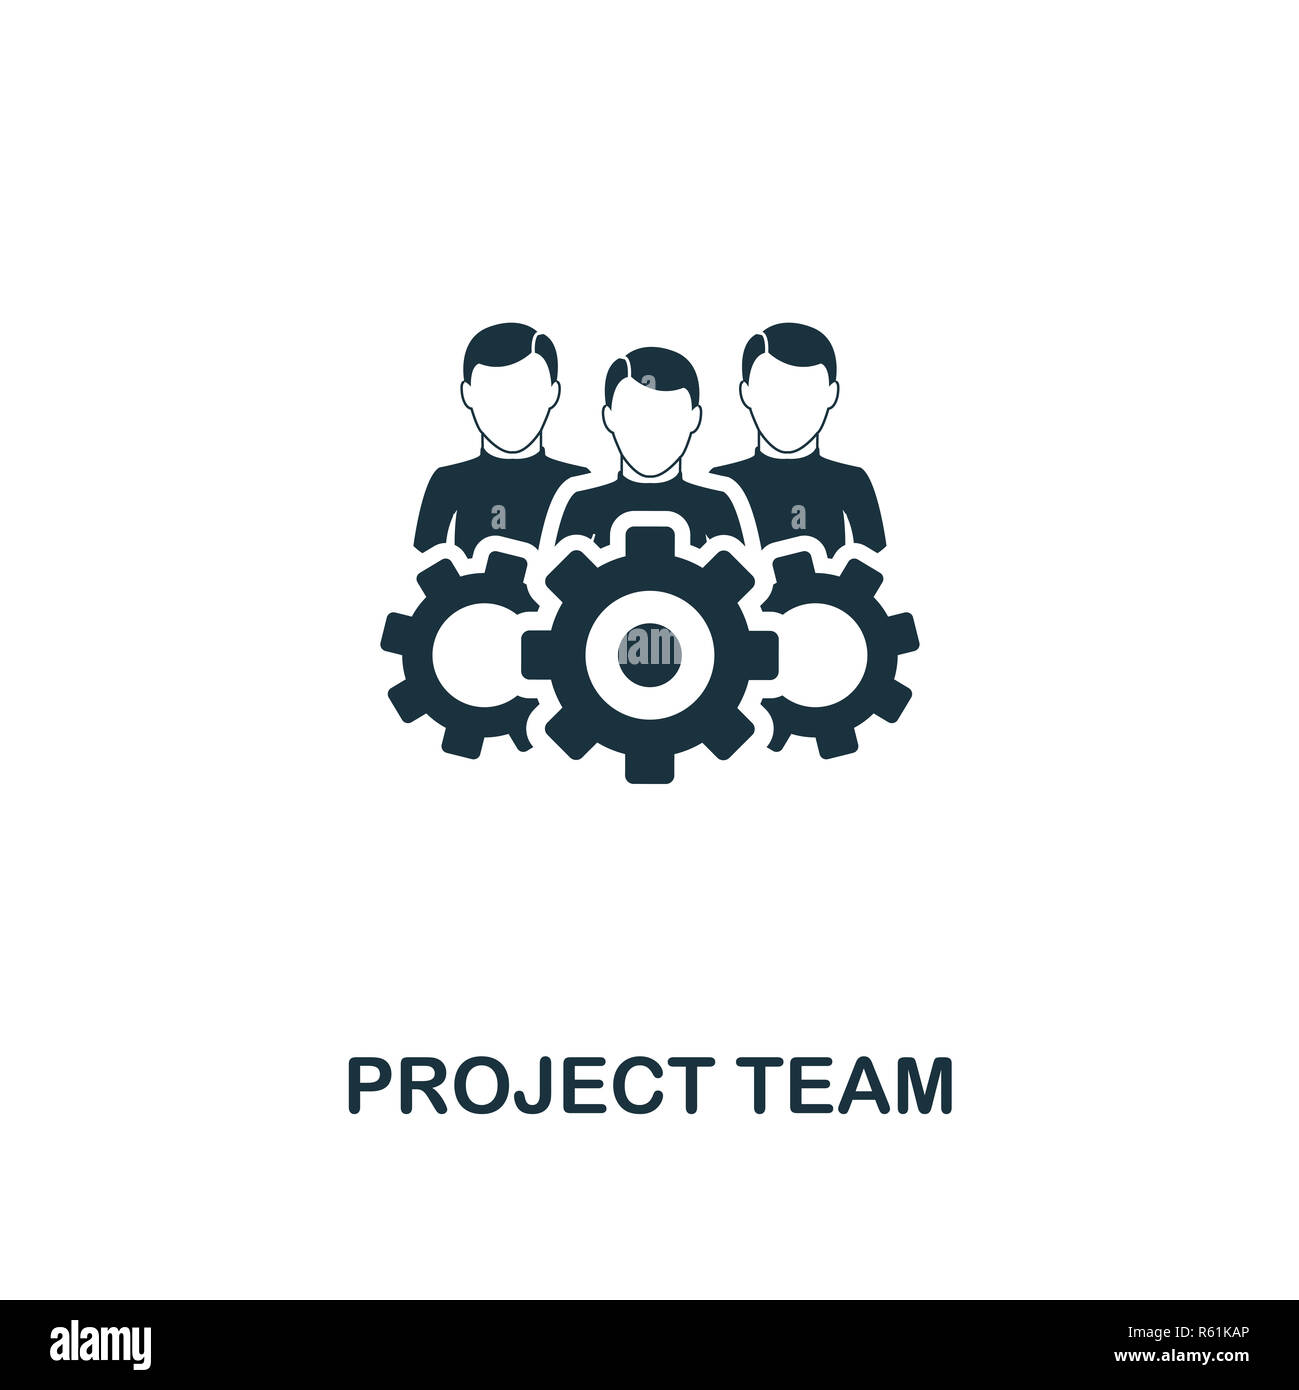 Project Team Icon Premium Style Design From Teamwork Icon Collection Ui And Ux Pixel Perfect Project Team Icon For Web Design Apps Software Print Usage Stock Photo Alamy